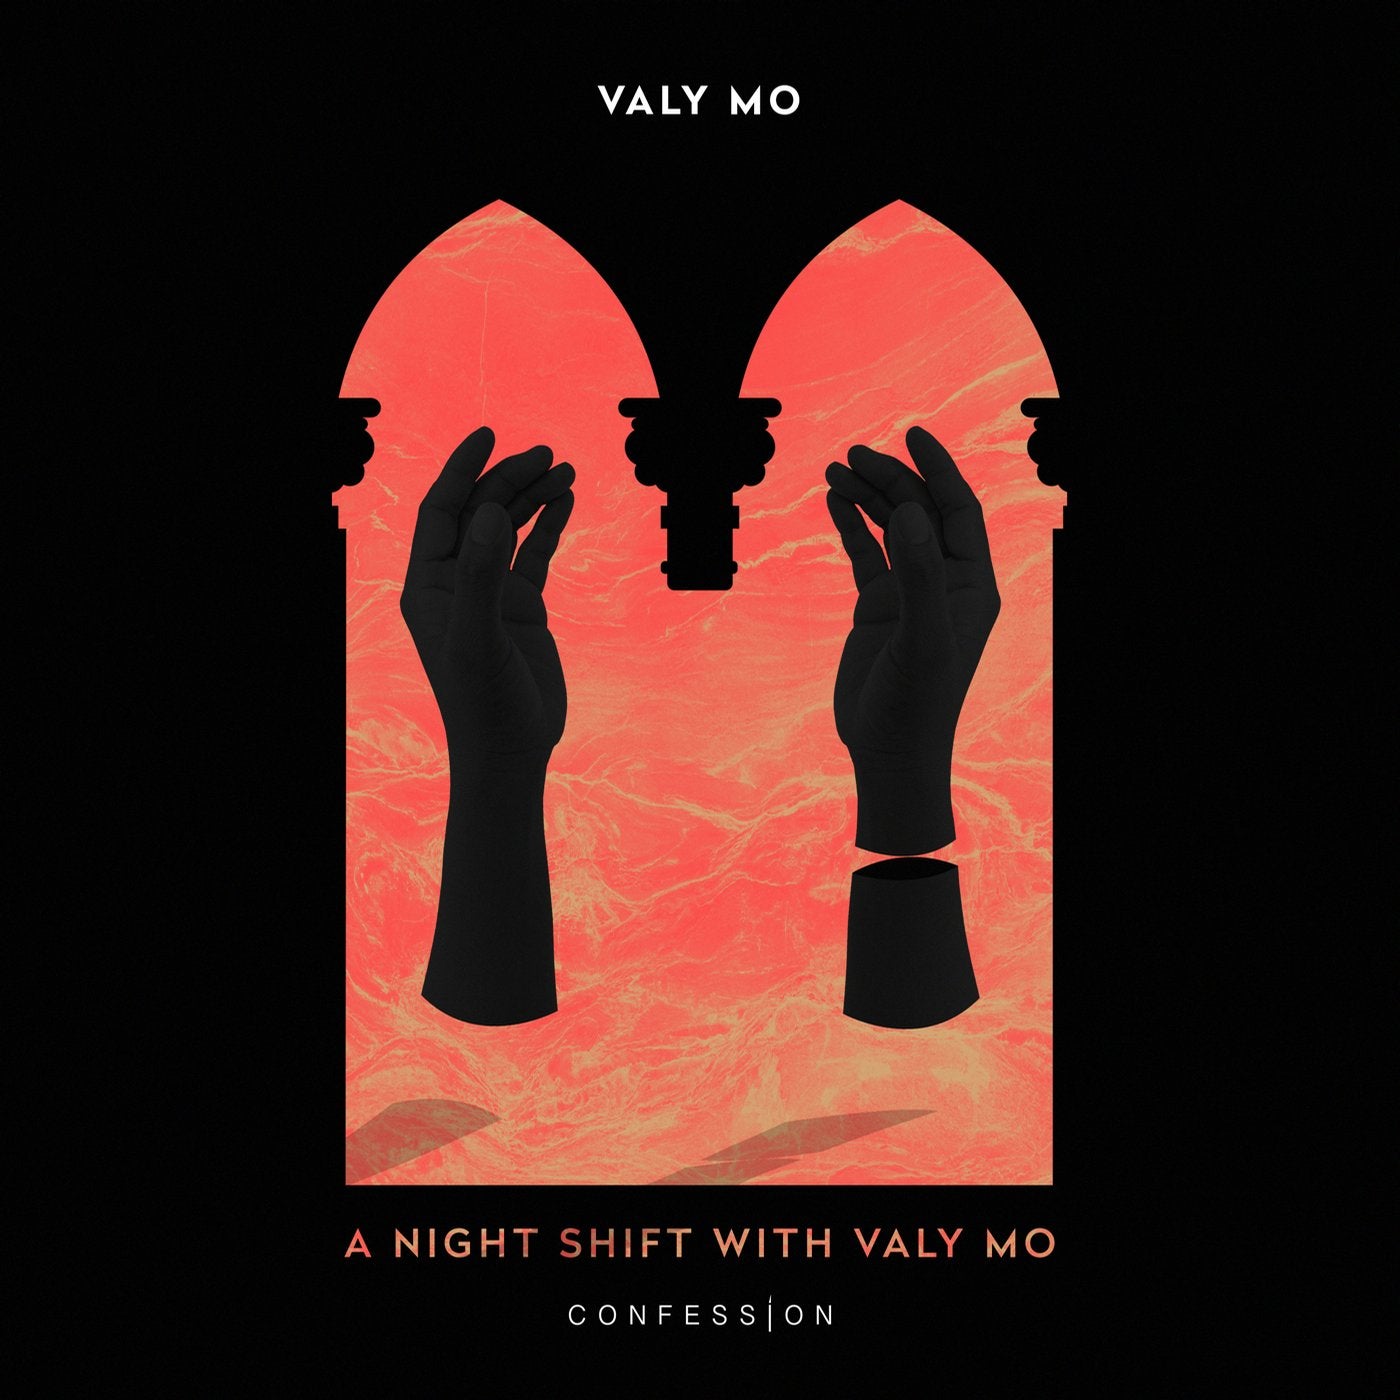 A Nightshift With Valy Mo